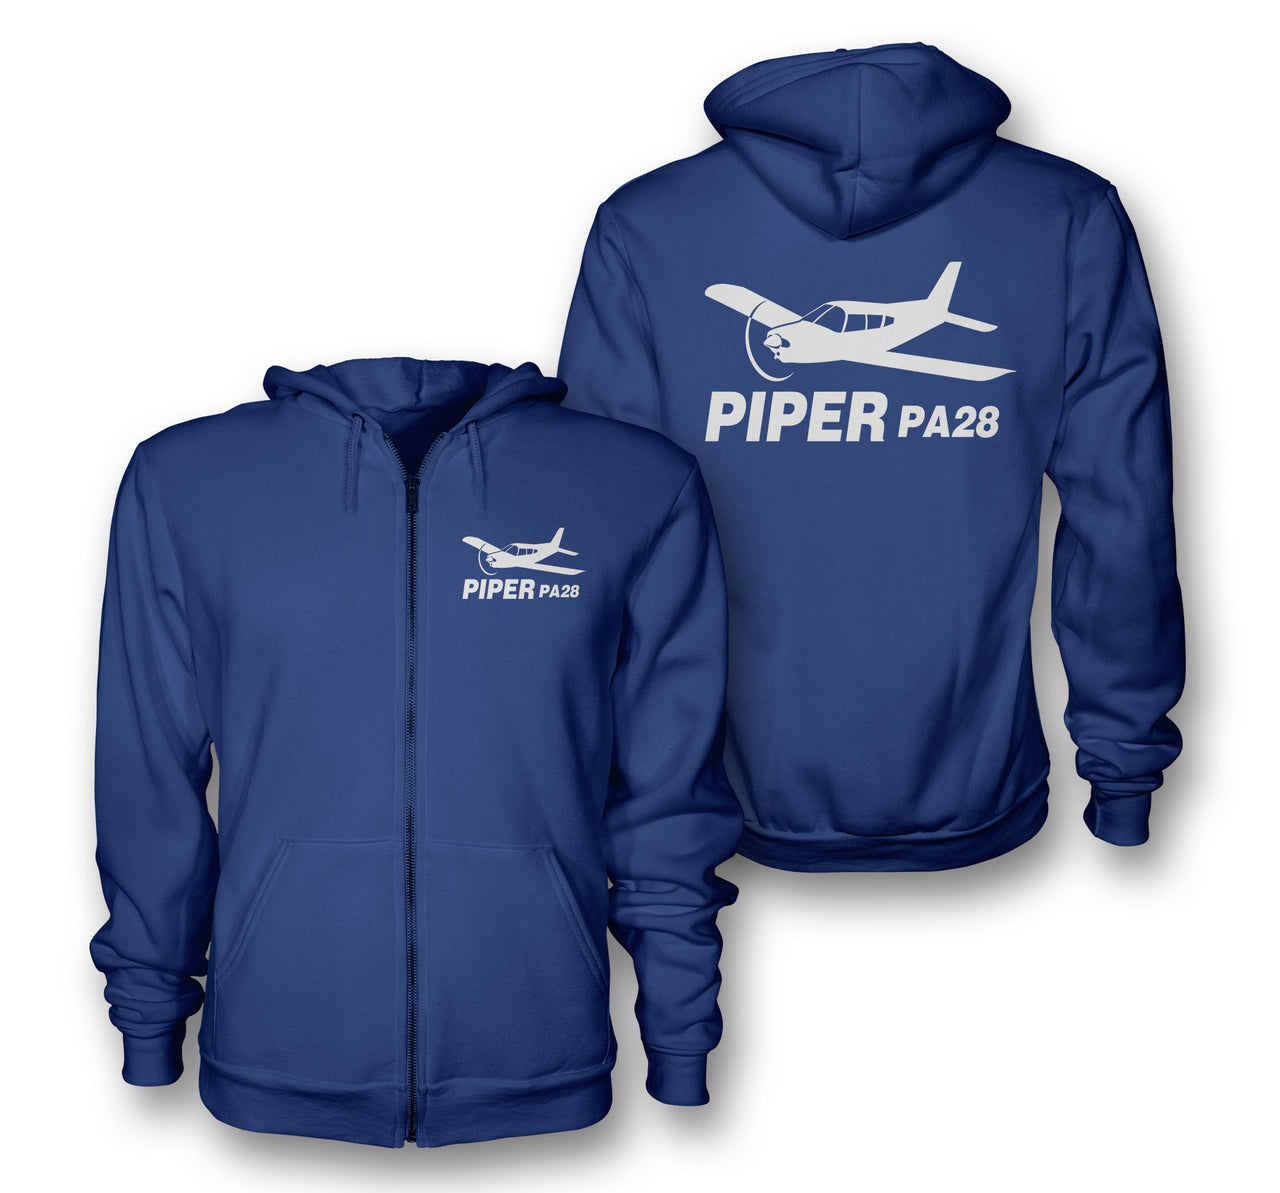 The Piper PA28 Designed Zipped Hoodies